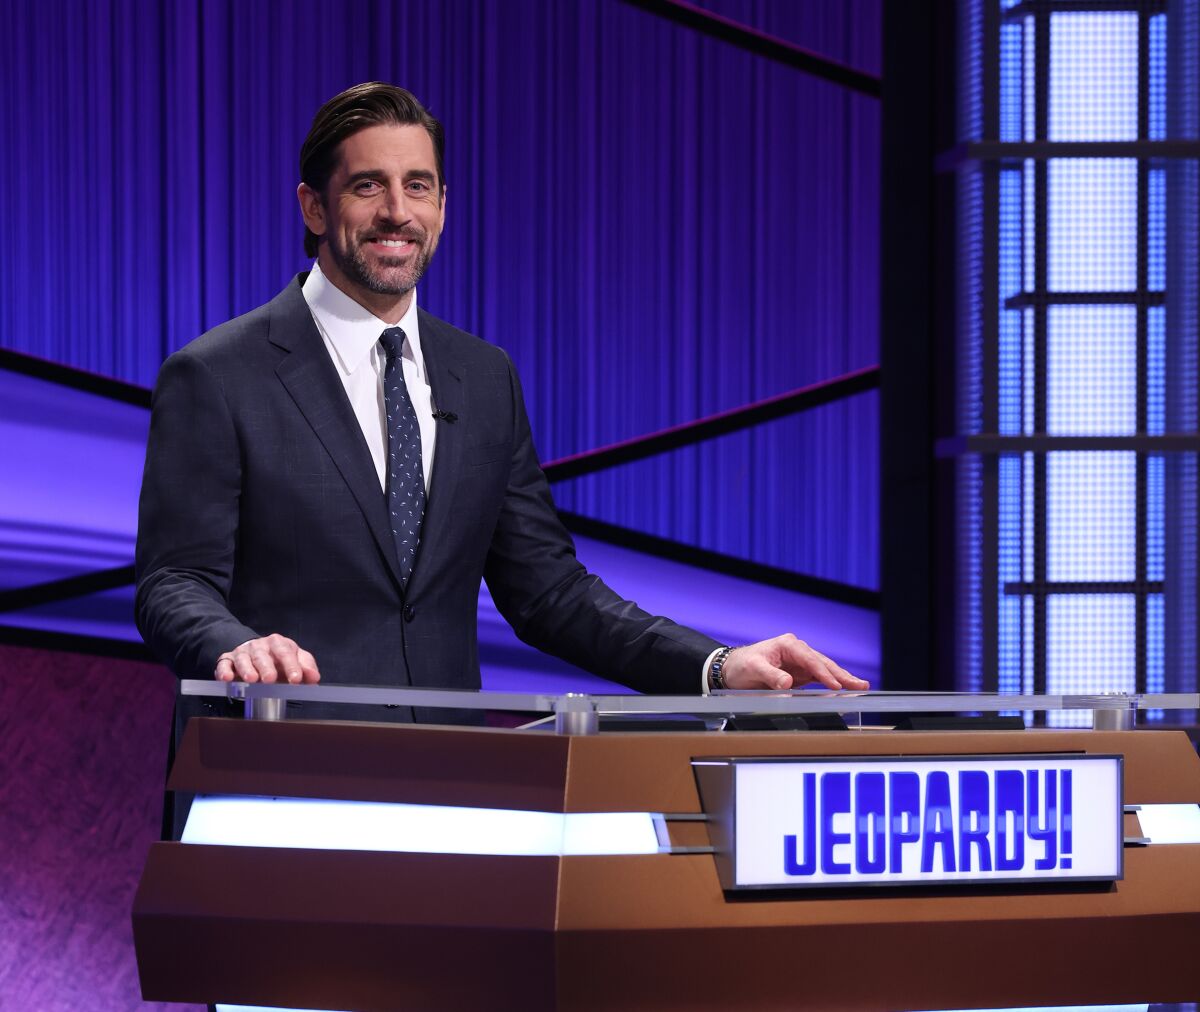 Unvaccinated Green Bay Packers quarterback Aaron Rodgers wanted to host "Jeopardy!" and then put others in jeopardy.